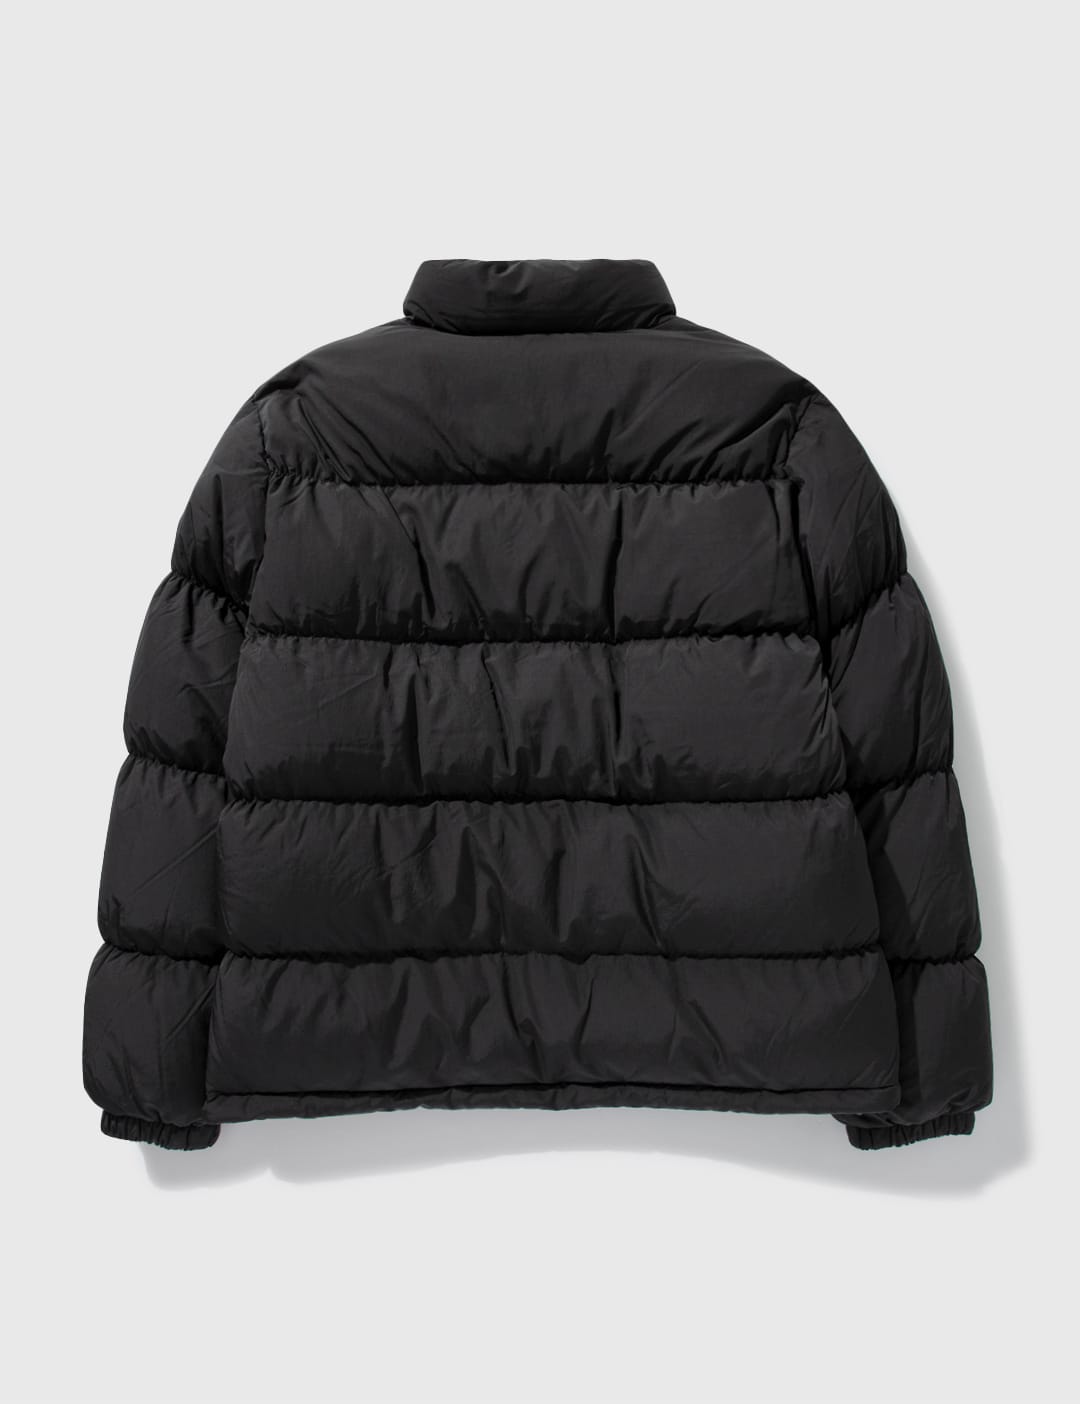 Stüssy - Ripstop Down Puffer Jacket | HBX - Globally Curated 